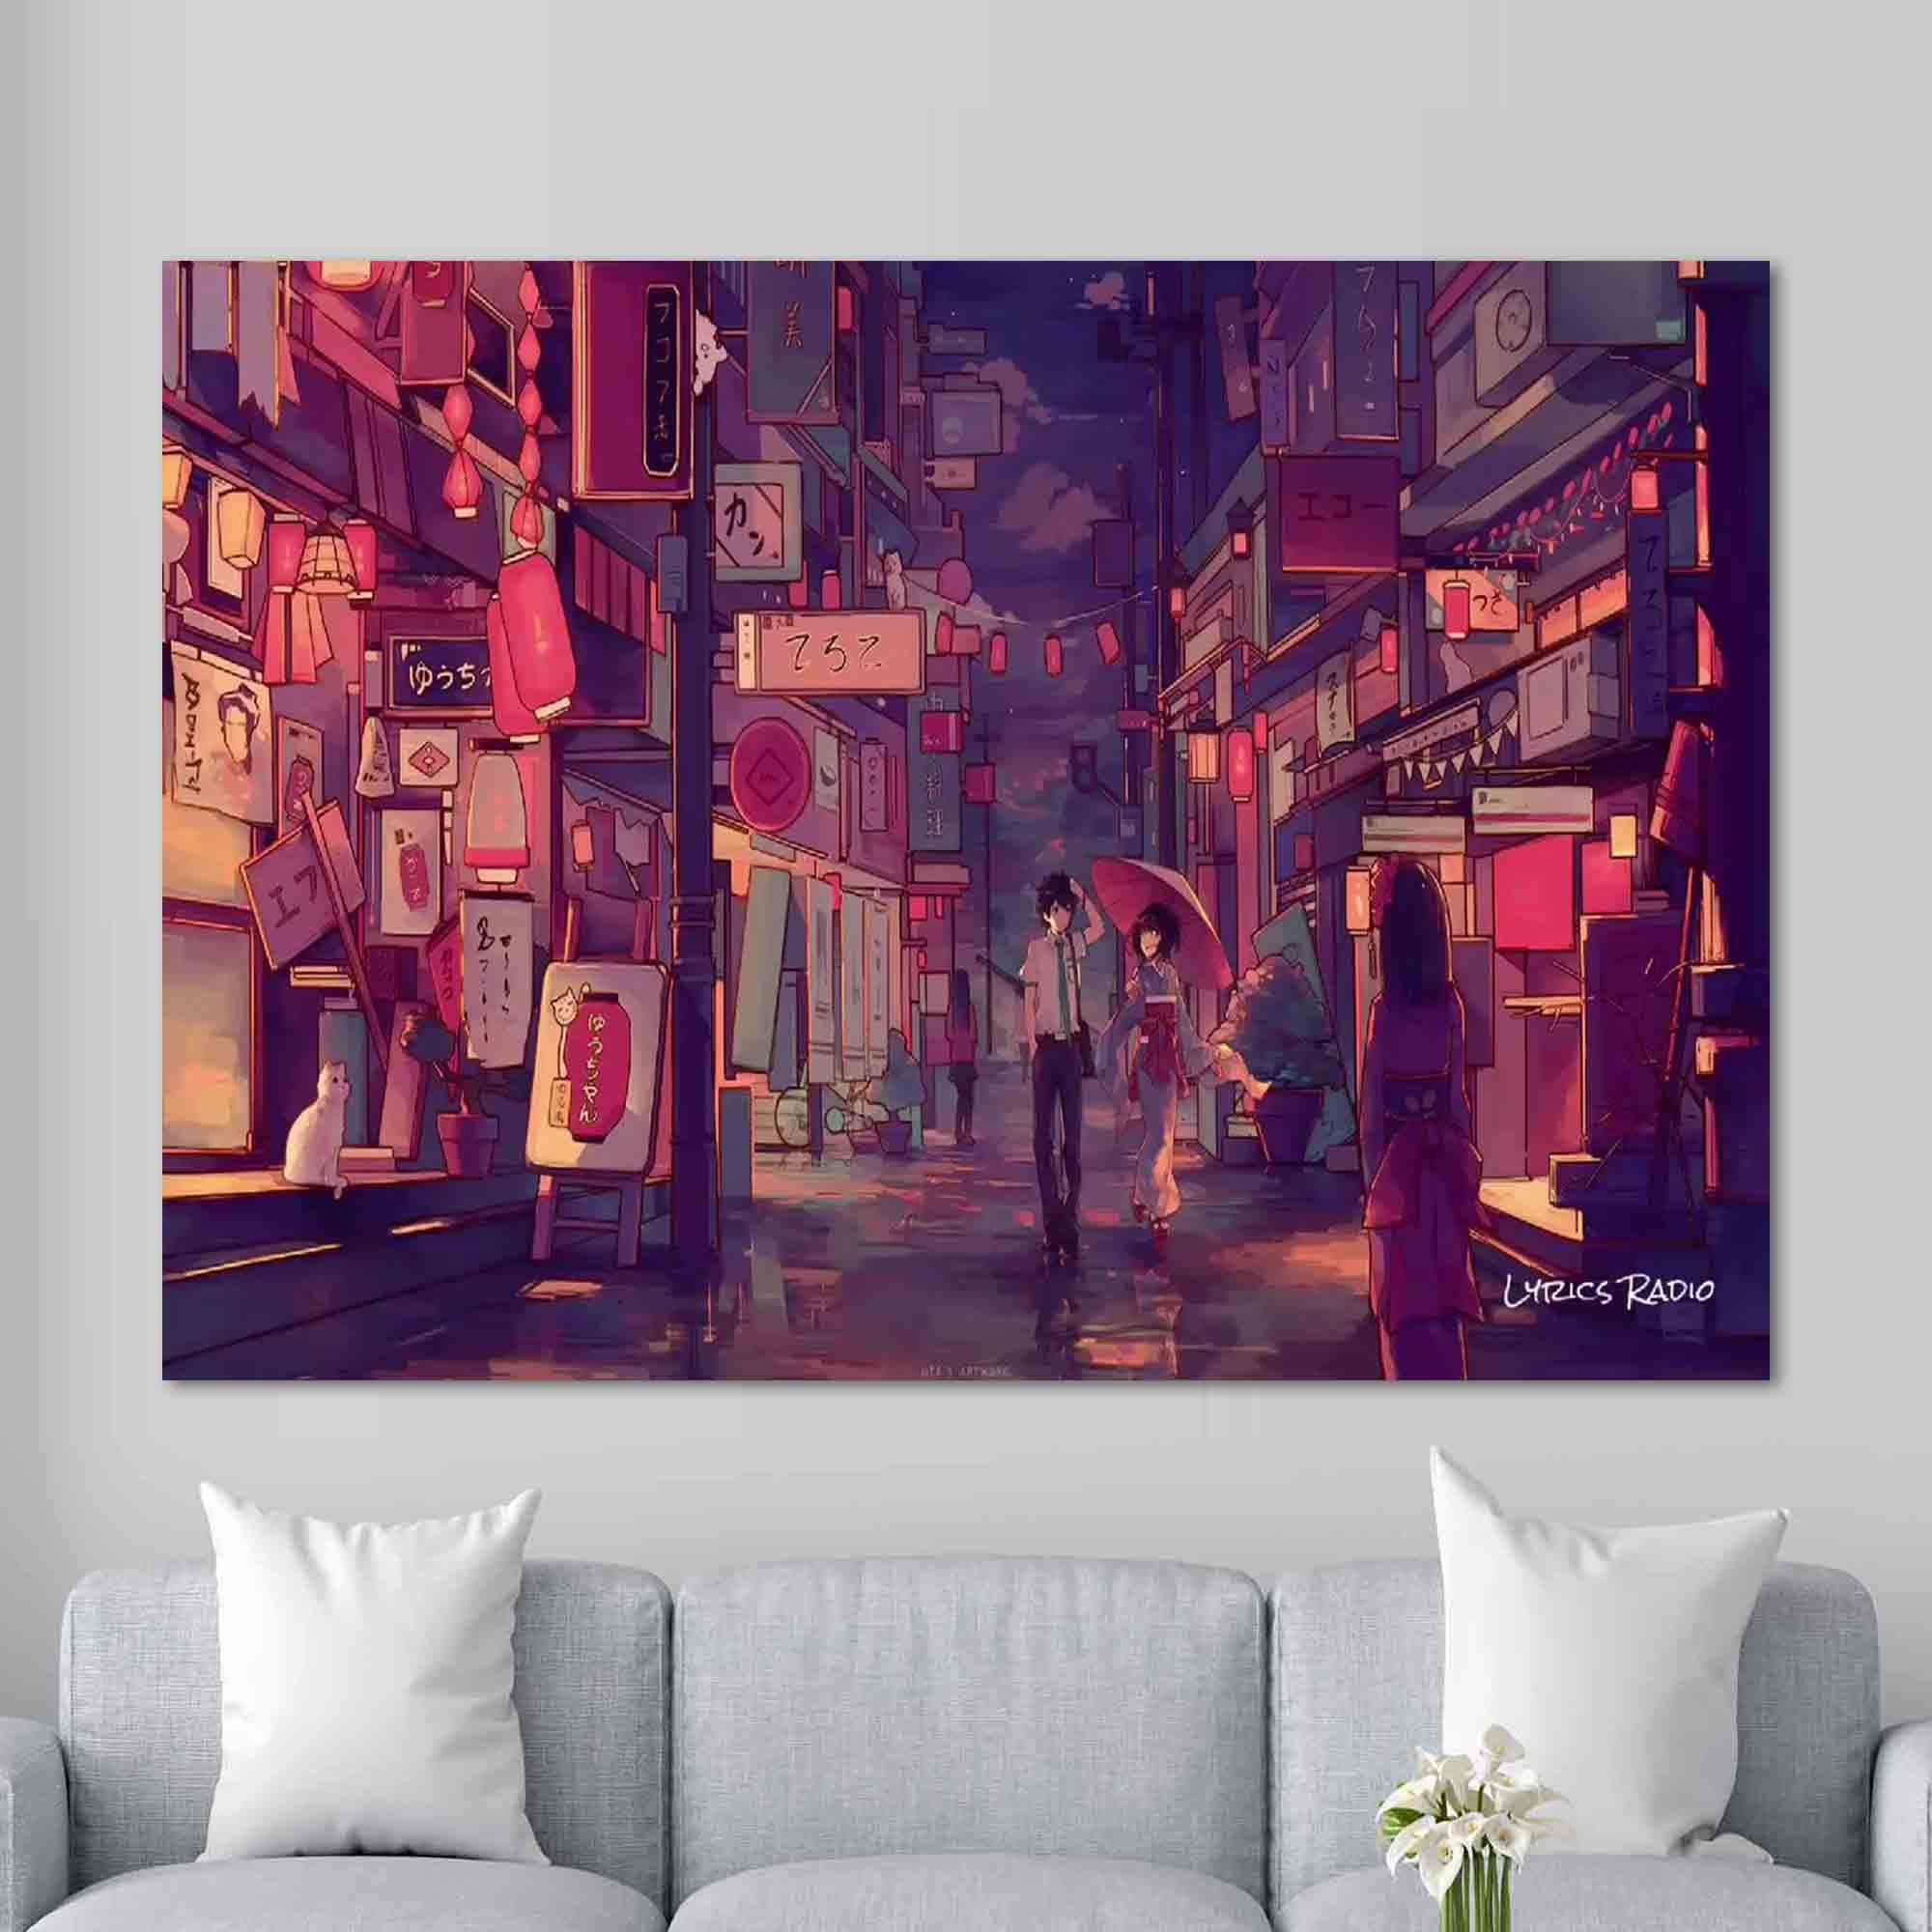 The Famous Attacking Giant Lenaing Giant Mi kasa Ackerman Anime Poster 23  Canvas Poster Bedroom Decor Sports Landscape Office Room Decor Gift  Unframe1624inch4060cm  Amazonca Home